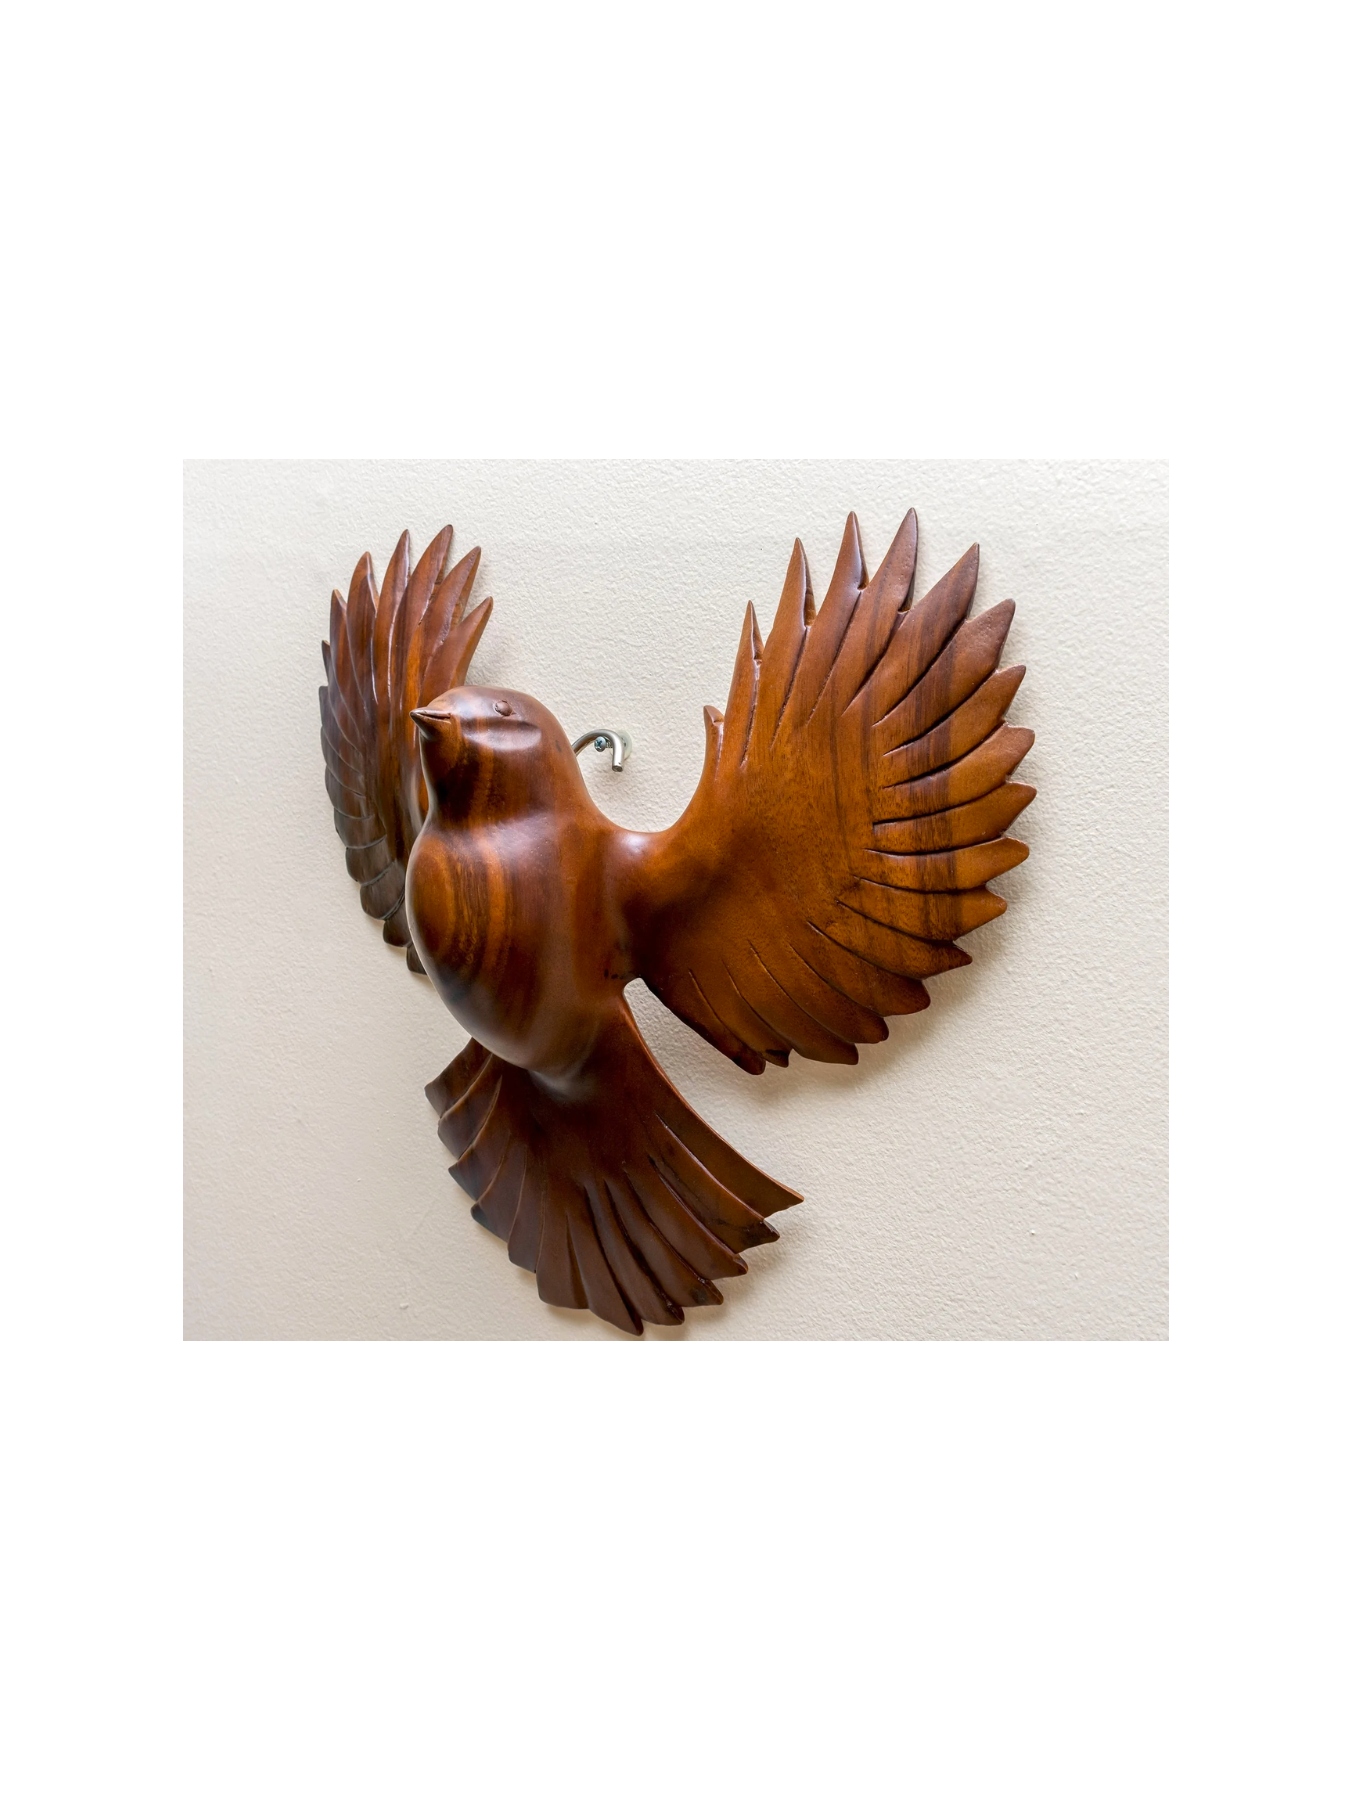 Wooden Hand Carved Starling Bird Wall Sculpture Art Decorative Statue Figurine Home Decor Accent Gift Handcrafted Hanging Decoration Handmade Brown